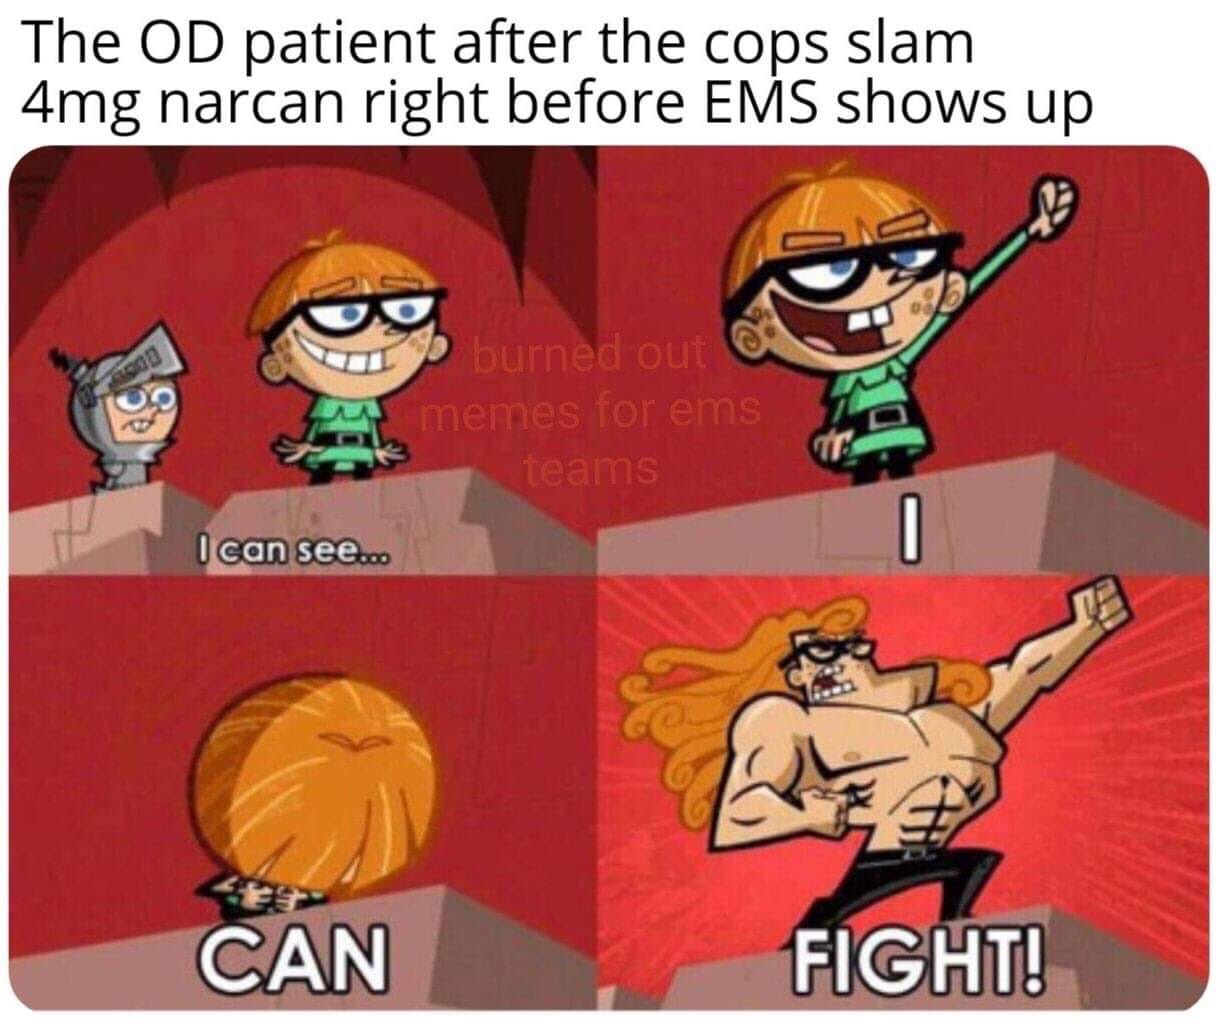 medical meme - you spoil endgame memes - The Od patient after the cops slam 4mg narcan right before Ems shows up P burned out memes for ems teams I can see... Can Fight!